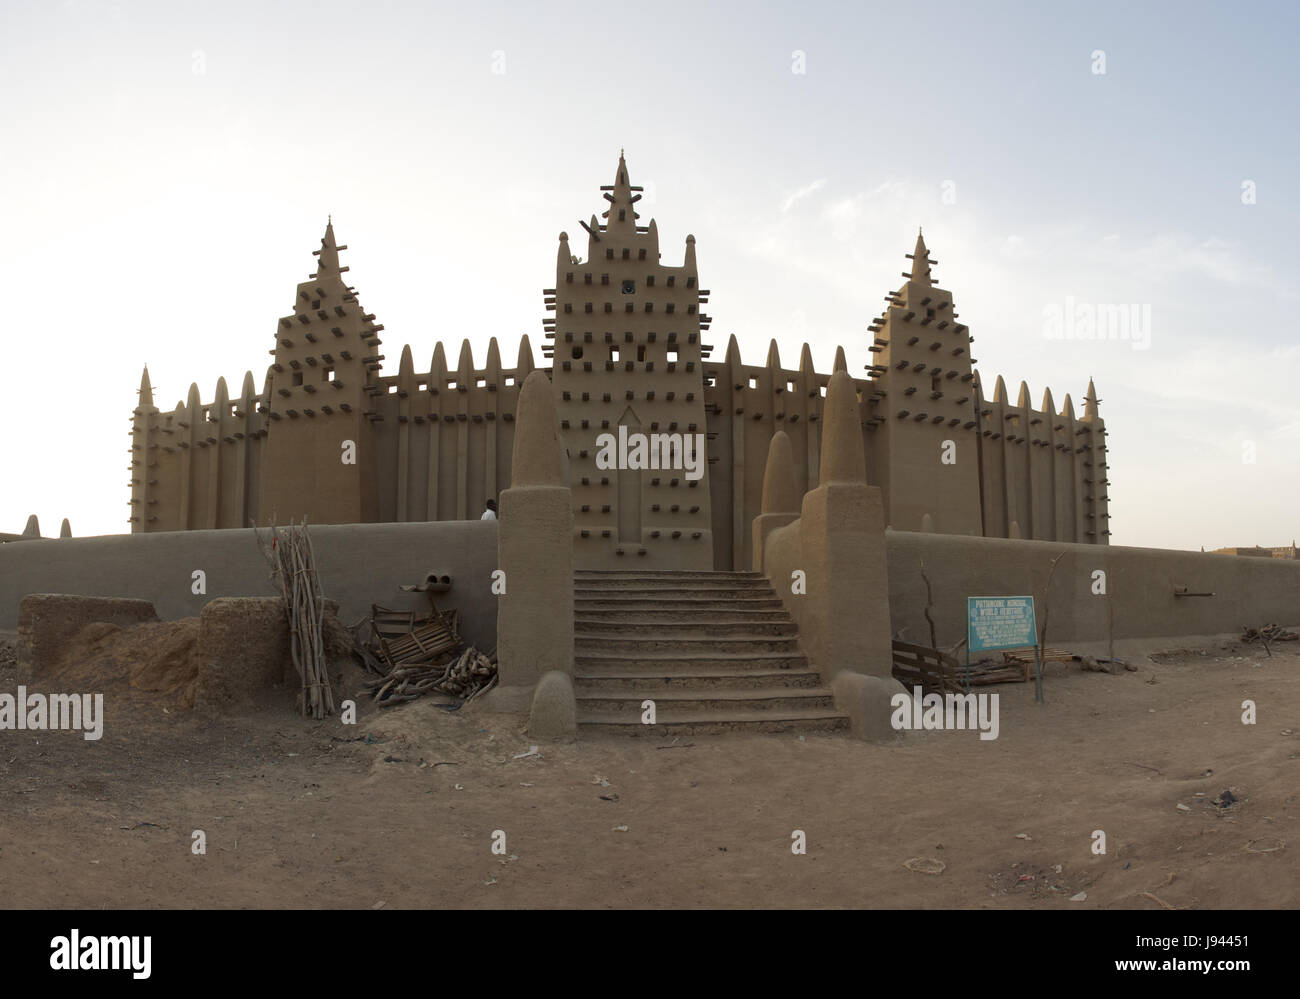 travel, protected, sheltered, religion, monument, africa, confusion, mess, Stock Photo